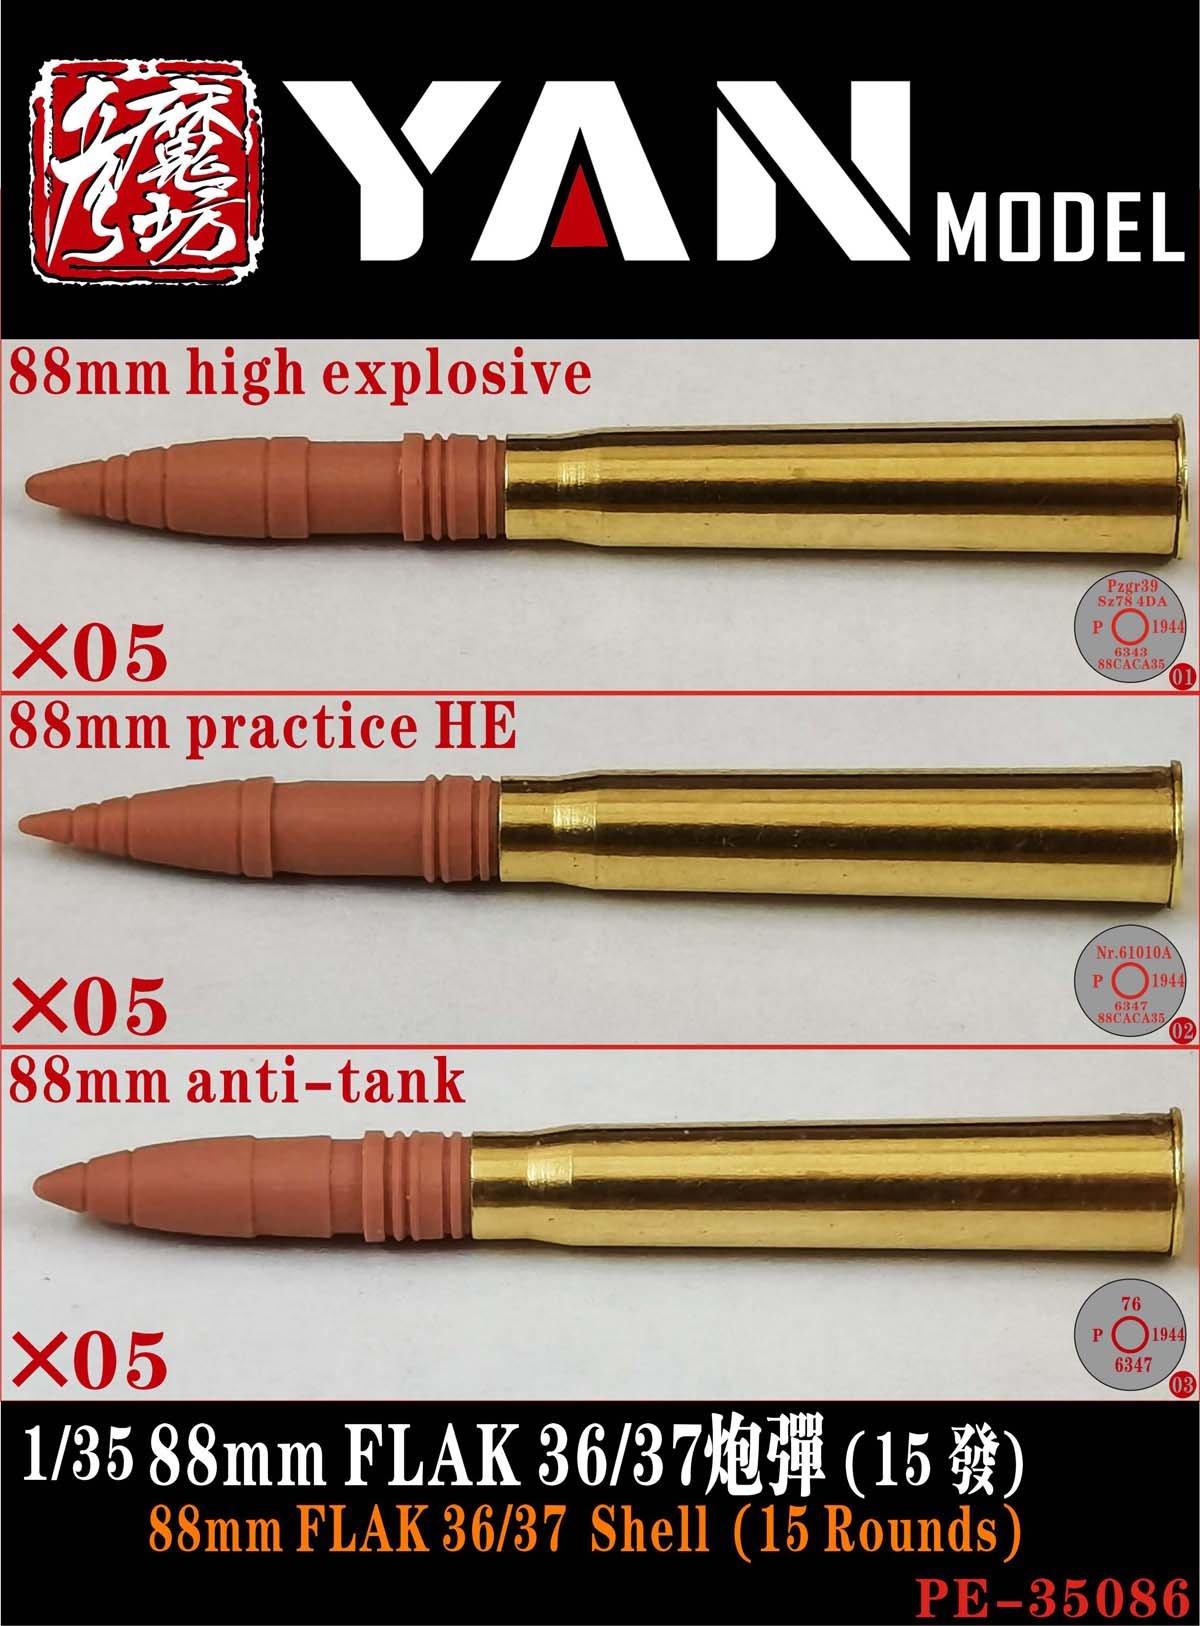 1/35 88mm Flak 36/37 Ammo Shell (15 Round) - Click Image to Close